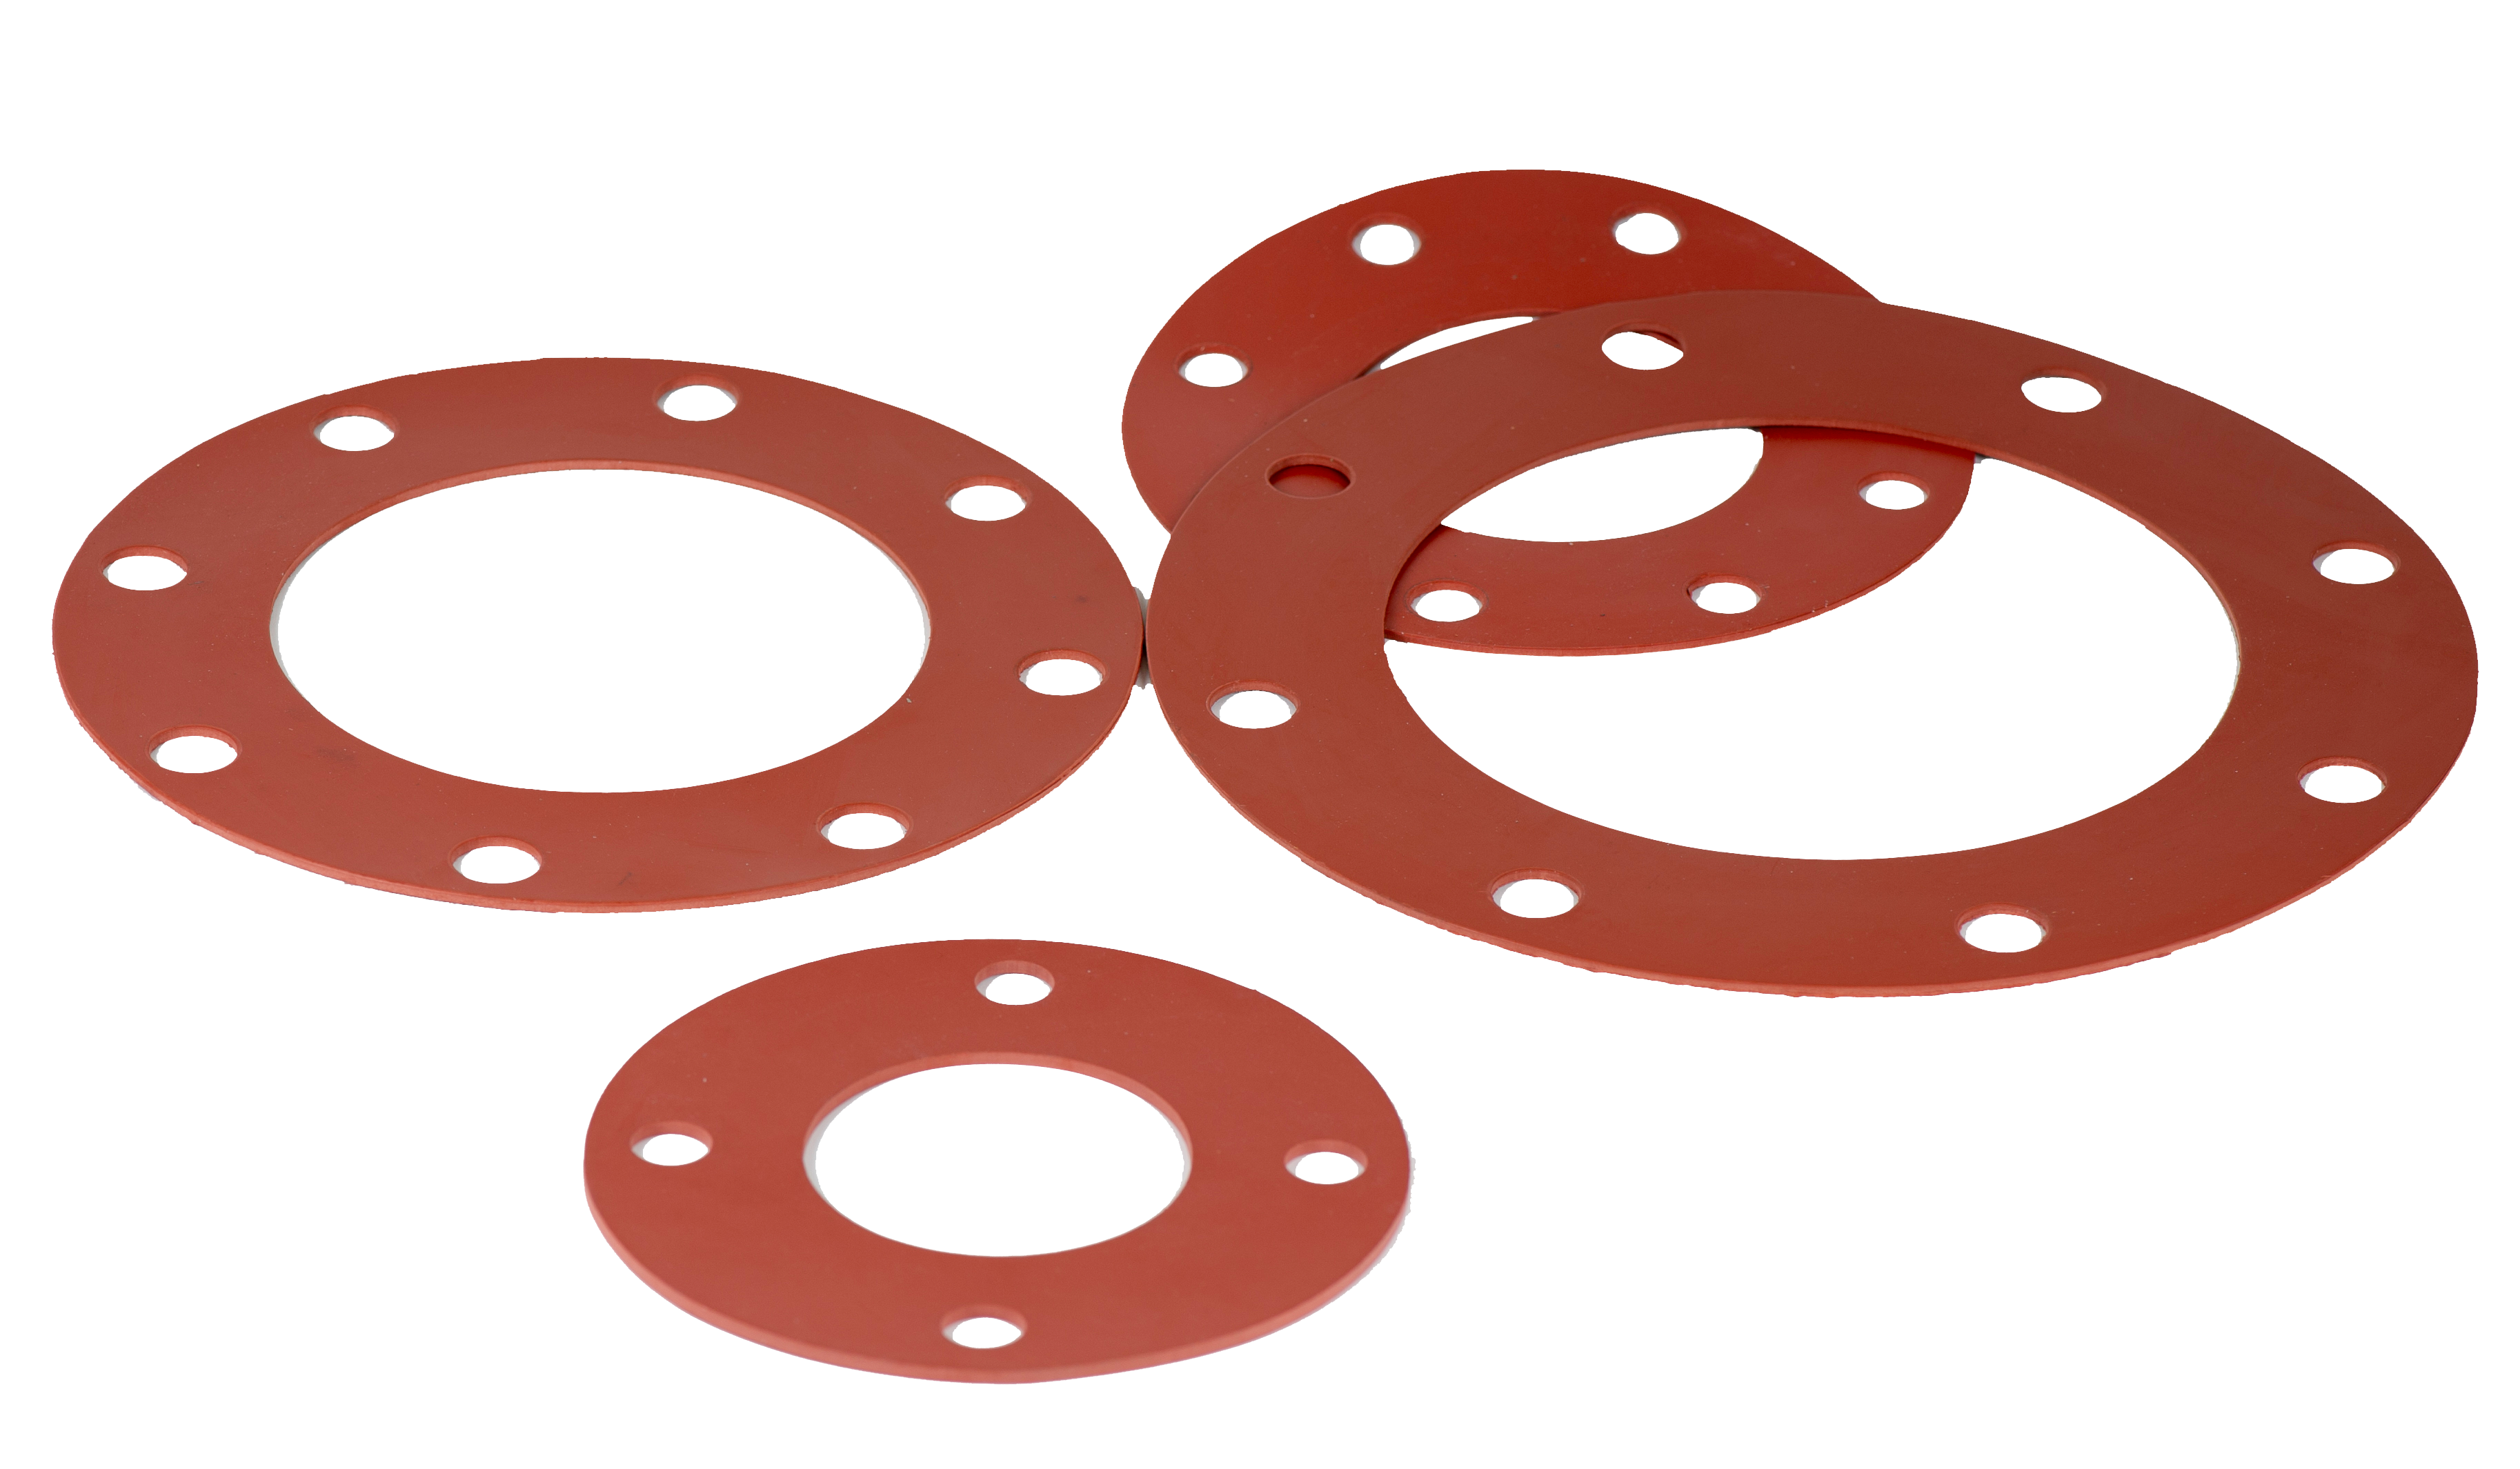 Pack of 20 3/4 Pipe Size Pressure Class 300# Sterling Seal CFF7540.750.031.300X20 7540 Vegetable Fiber Full Face Gasket 1/32 Thick Tan 